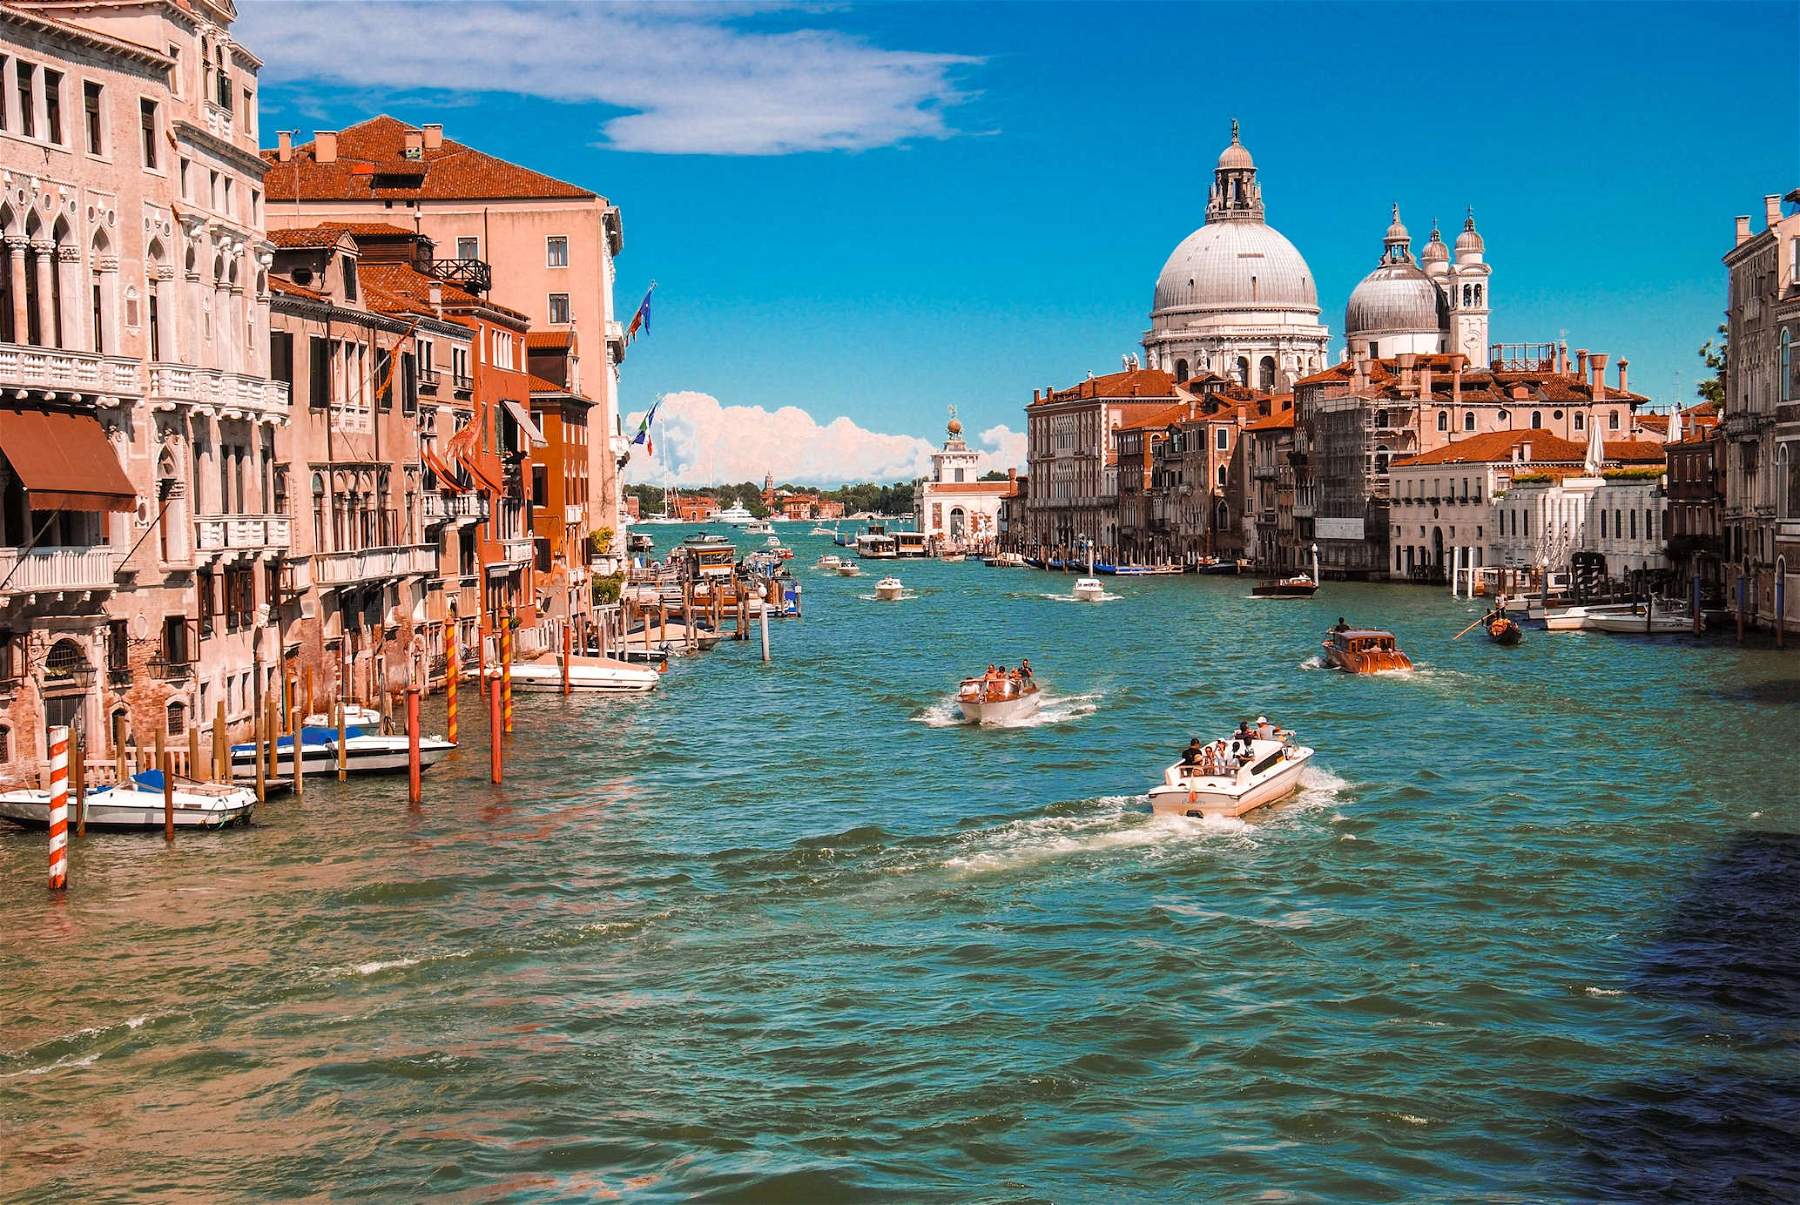 Venice, entry ticket kicks off: here are days it will be in effect, cost, excluded and exempt